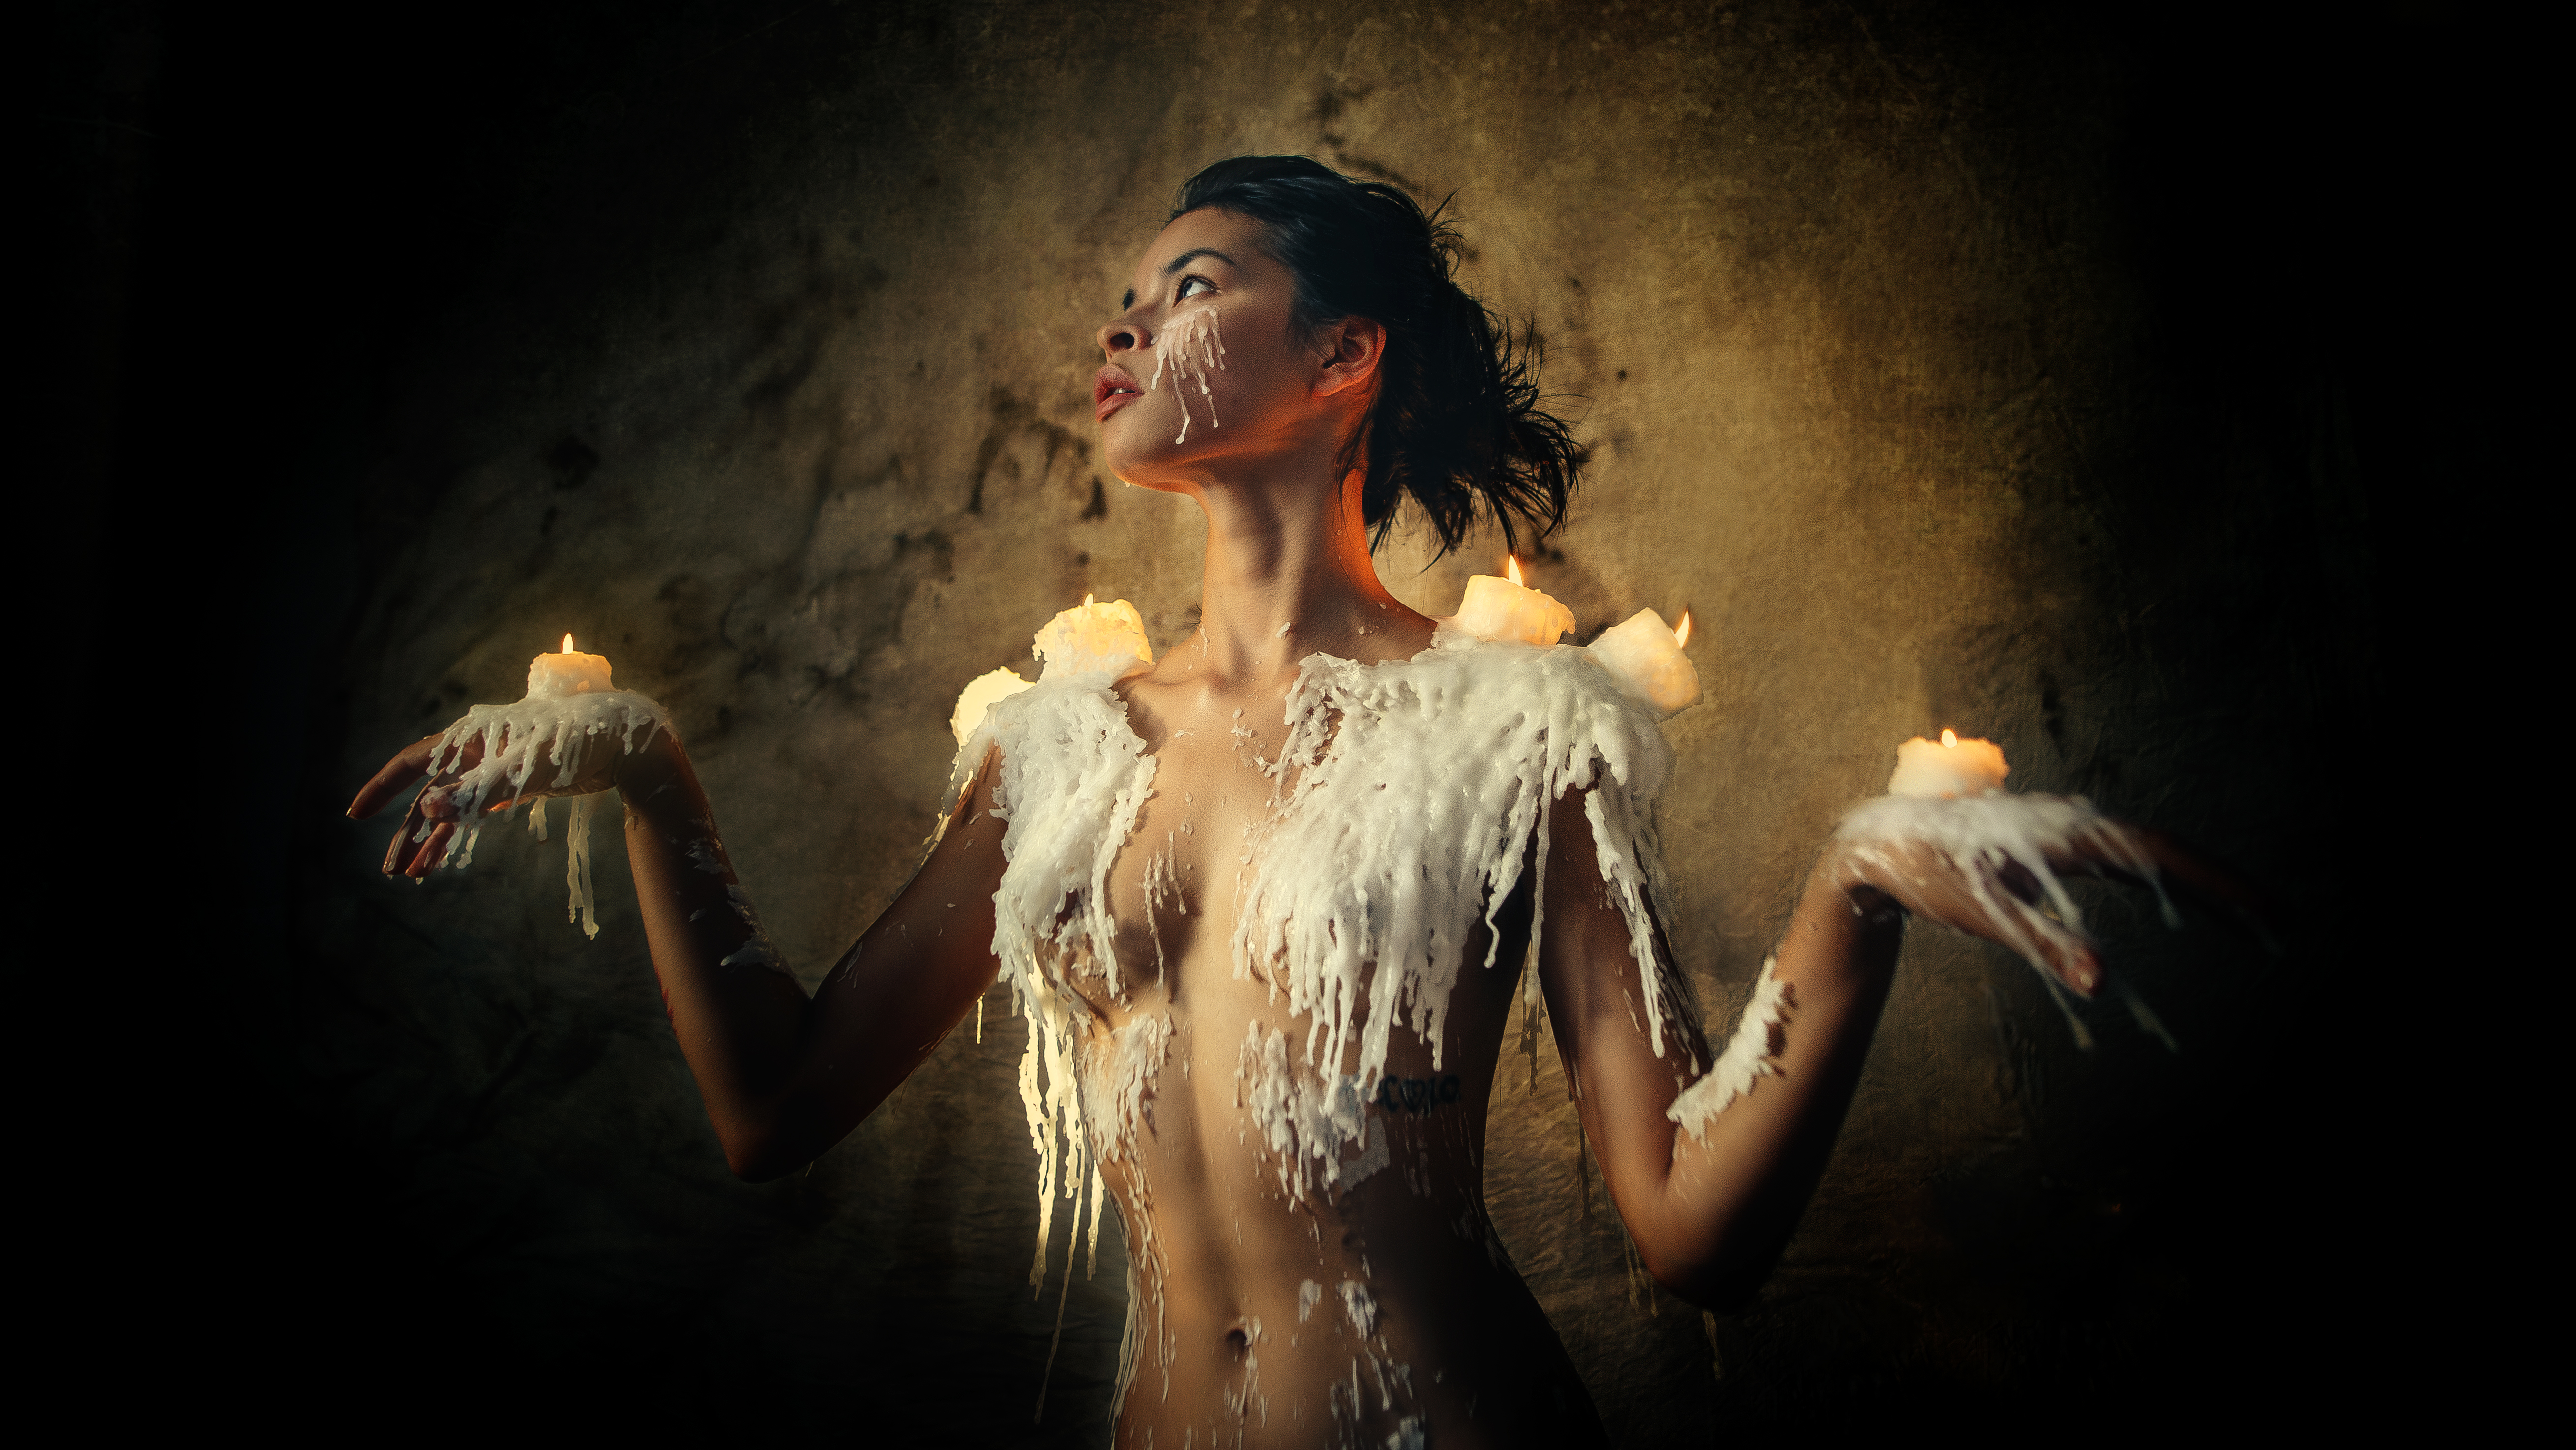 Andrew Vasiliev Uses Hot Wax for Breathtakingly Beautiful Photos (NSFW)